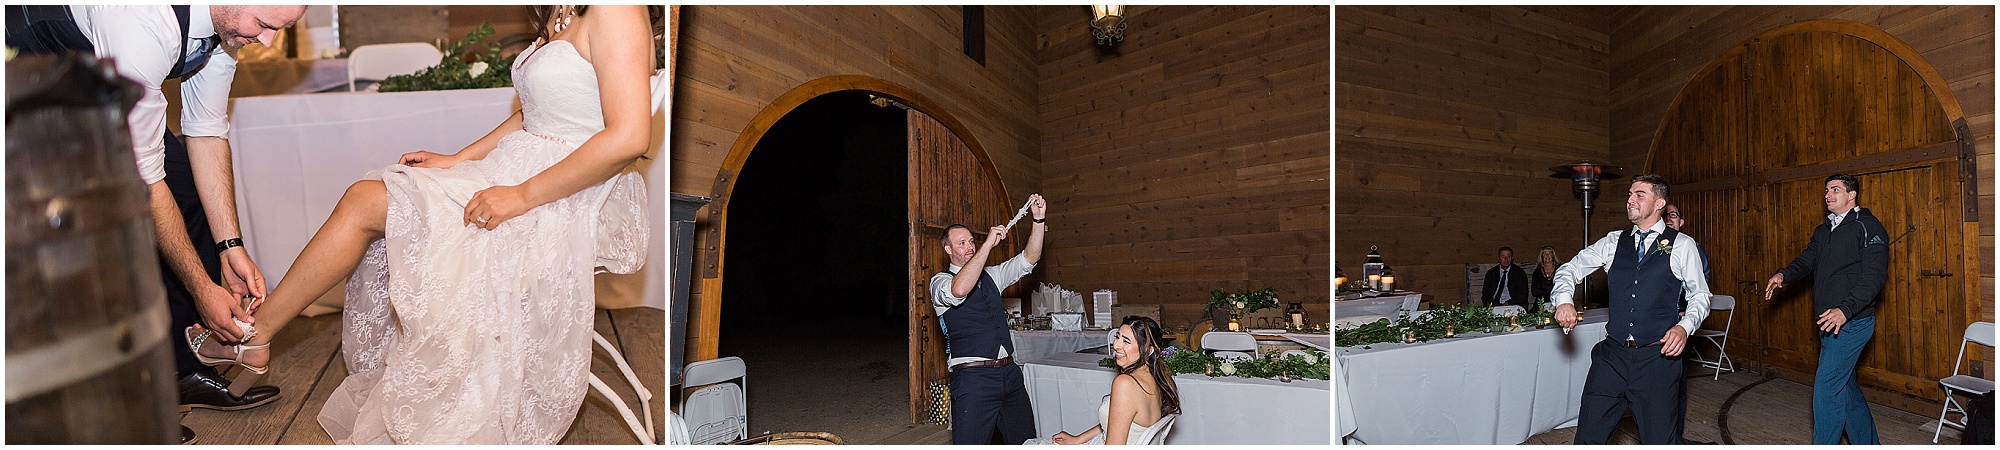 A traditional garter toss inside the Tuscan Stables wedding venue at Ranch at the Canyons near Bend, OR. | Erica Swantek Photography